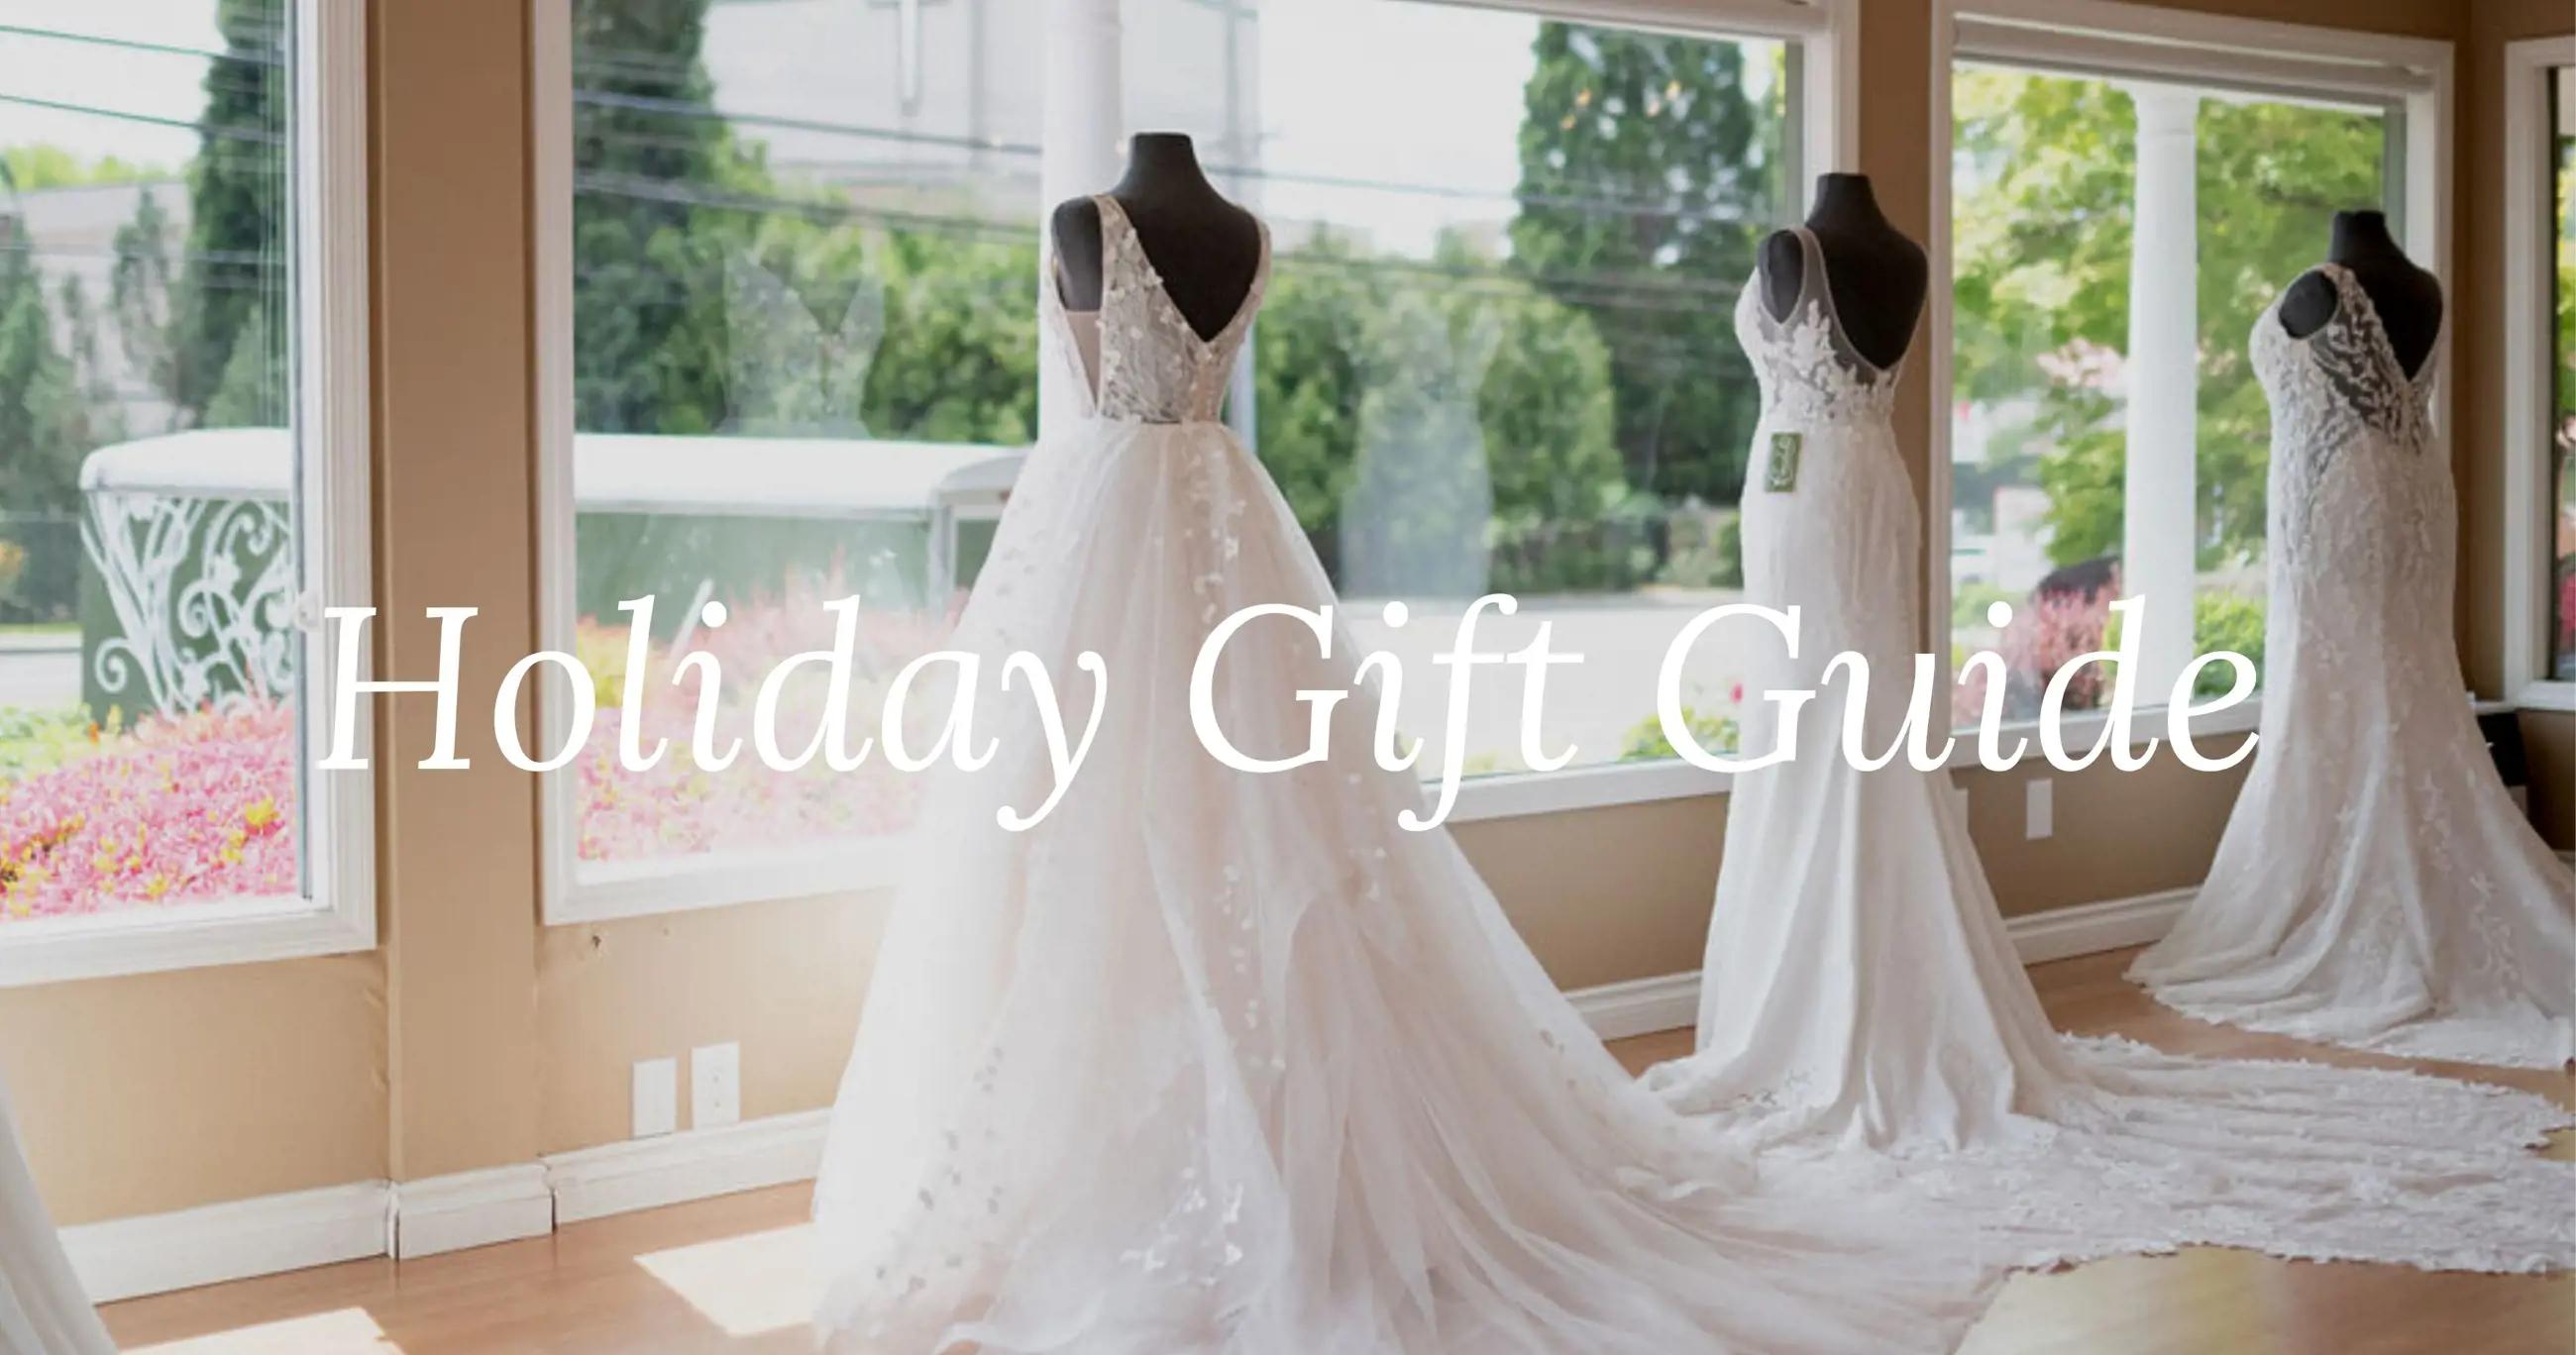 Portland Oregon Wedding Dresses with Holiday Gift Guide text overlay